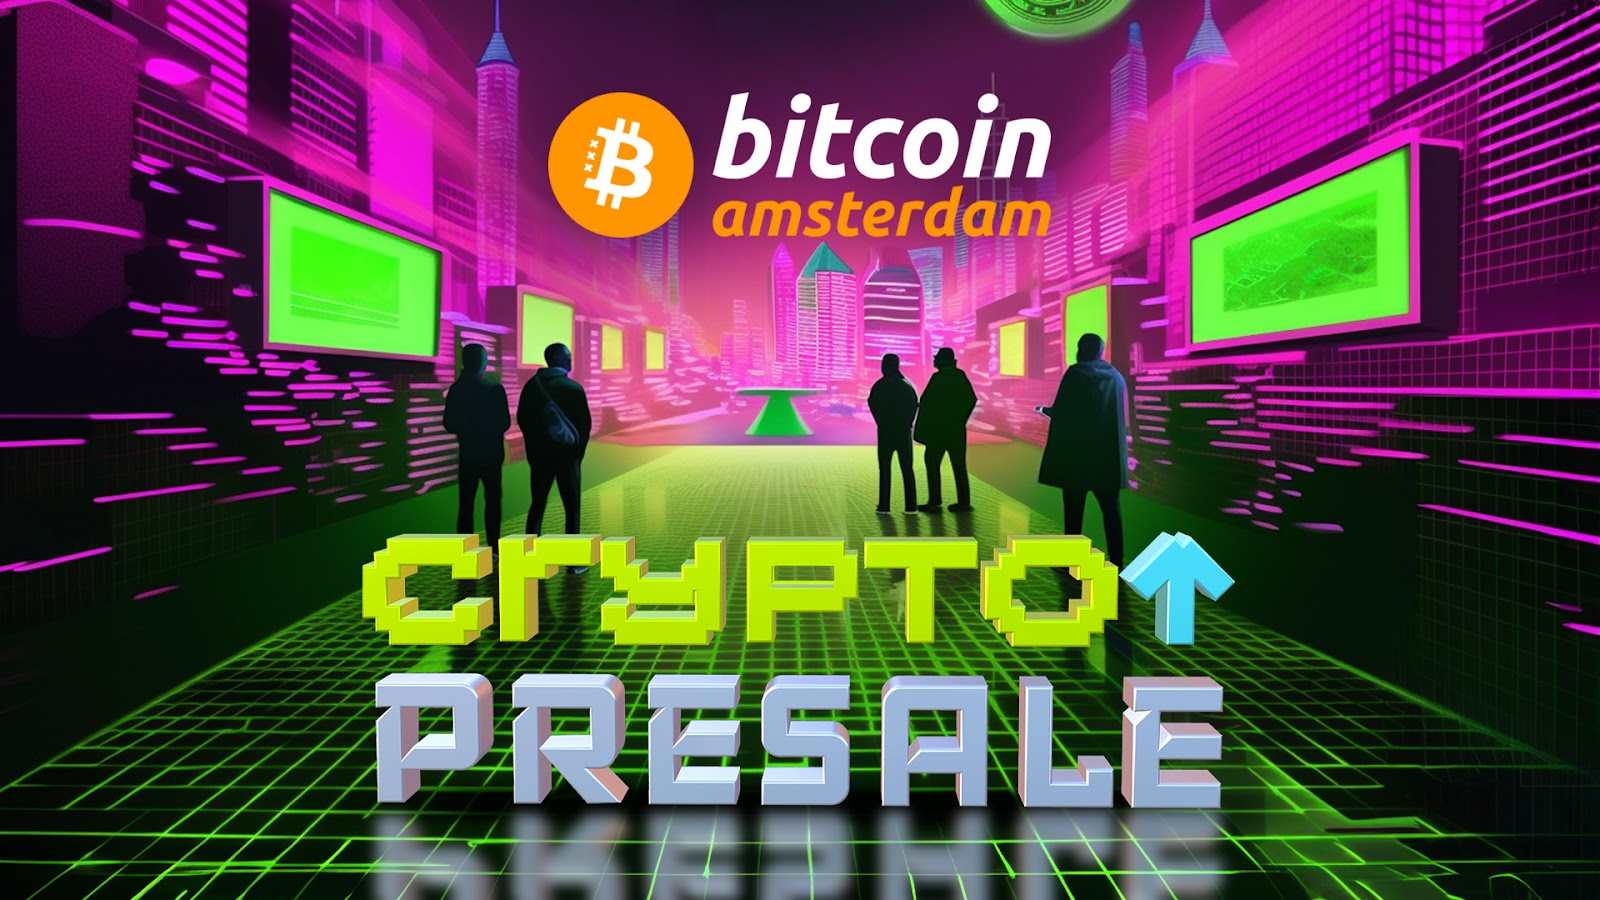 Crypto Presale Media Team to Attend ‘The Bitcoin Conference’ Amsterdam - ‘Where Europe Meets Bitcoin’